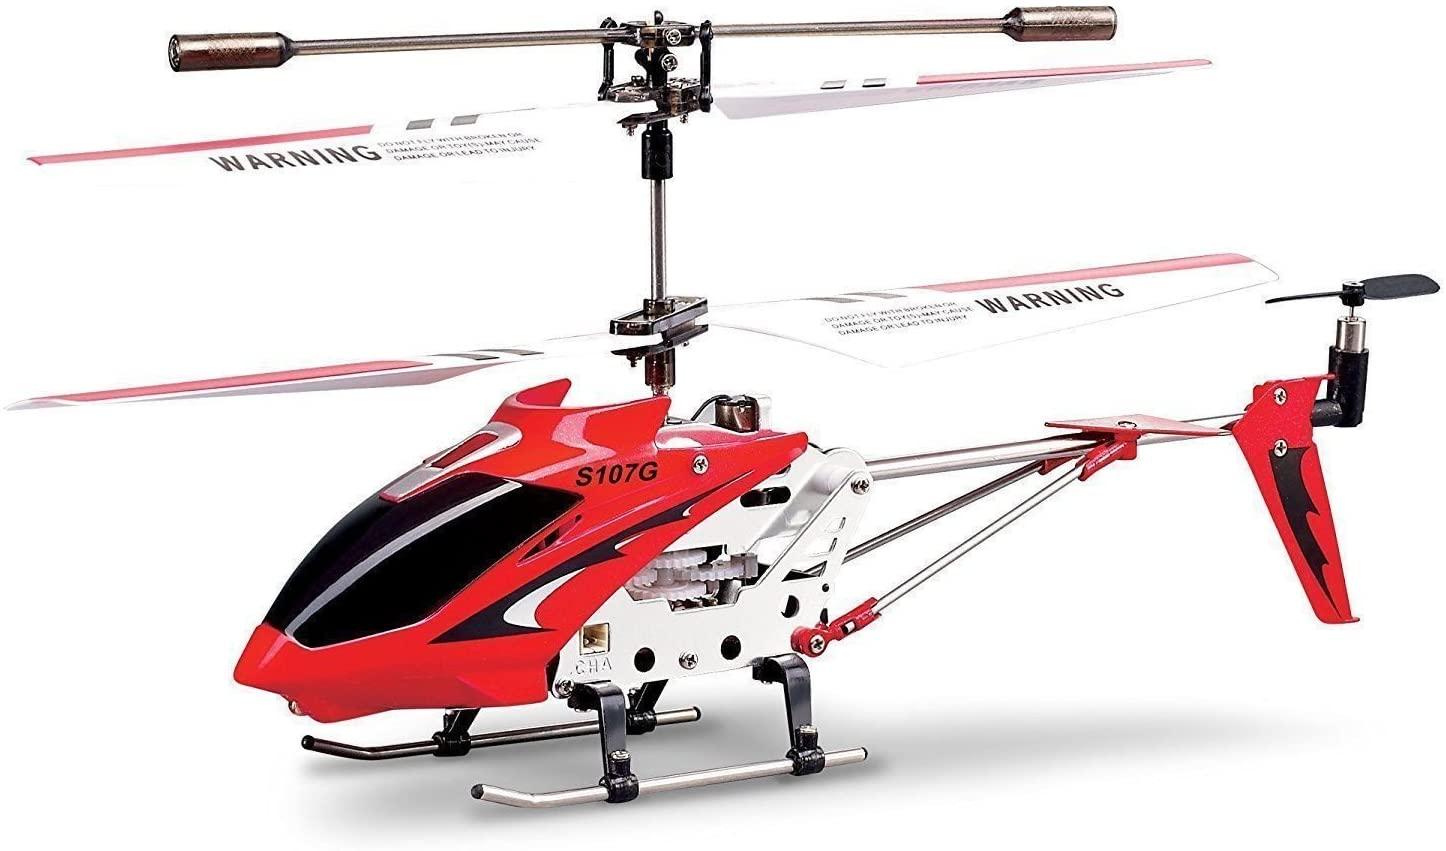 Rc Heli Kit: Comparing RC Heli Kits: Finding the Perfect Fit